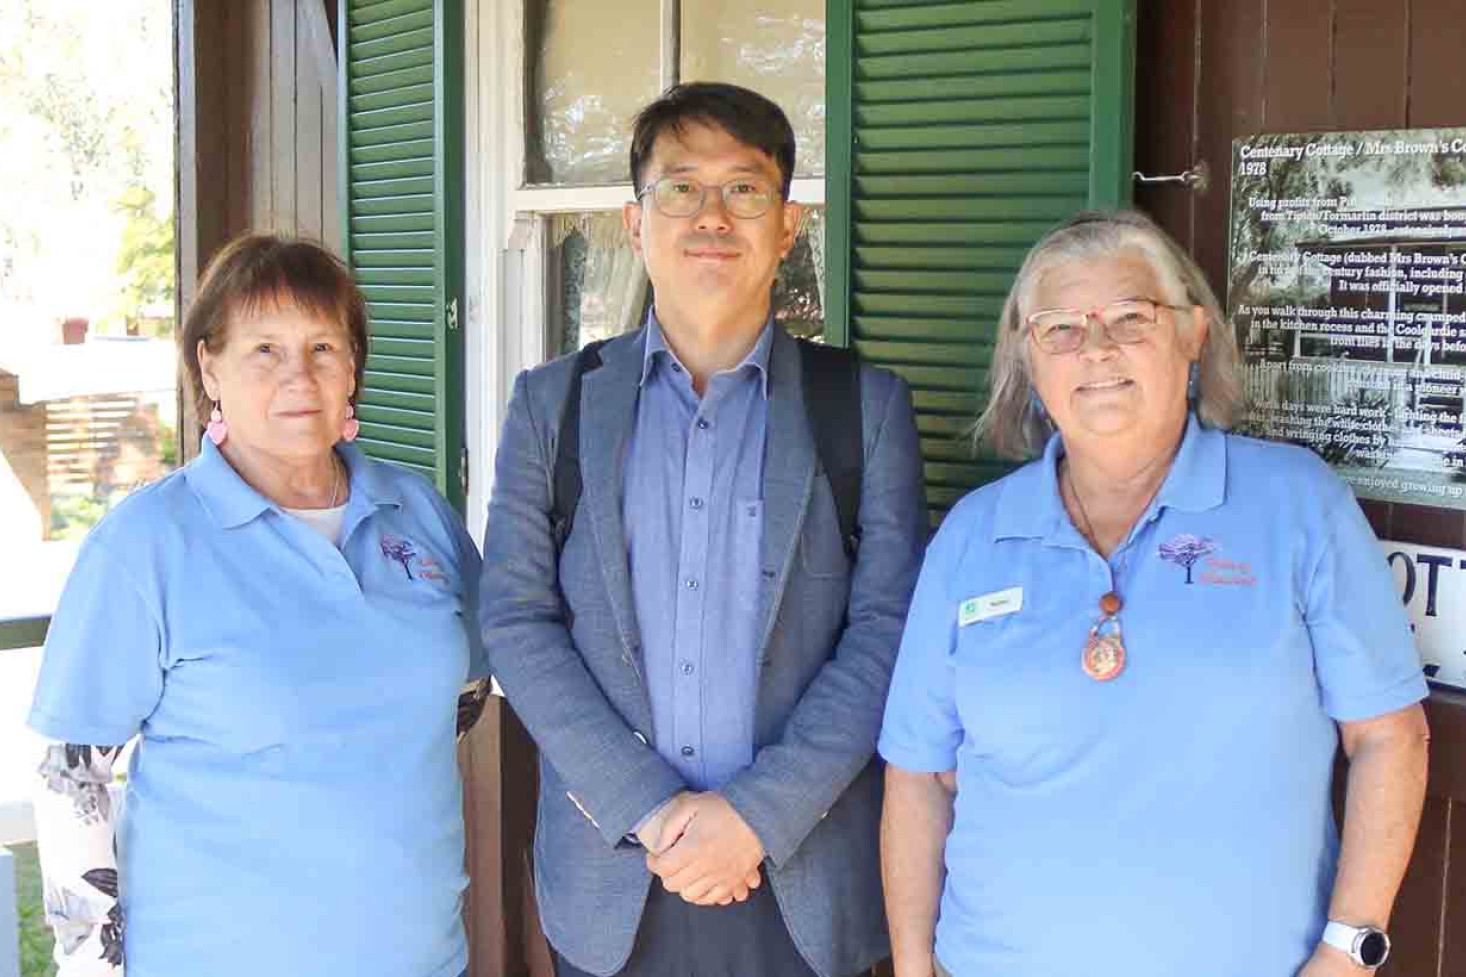 Standing on the verandah of Mrs Brown’s cottage are History Pittsworth volunteers Mary Sullivan and Barbara Walker during a tour of the Pioneer Village with Sung-Hak Yeo (centre) from the Paju Council.